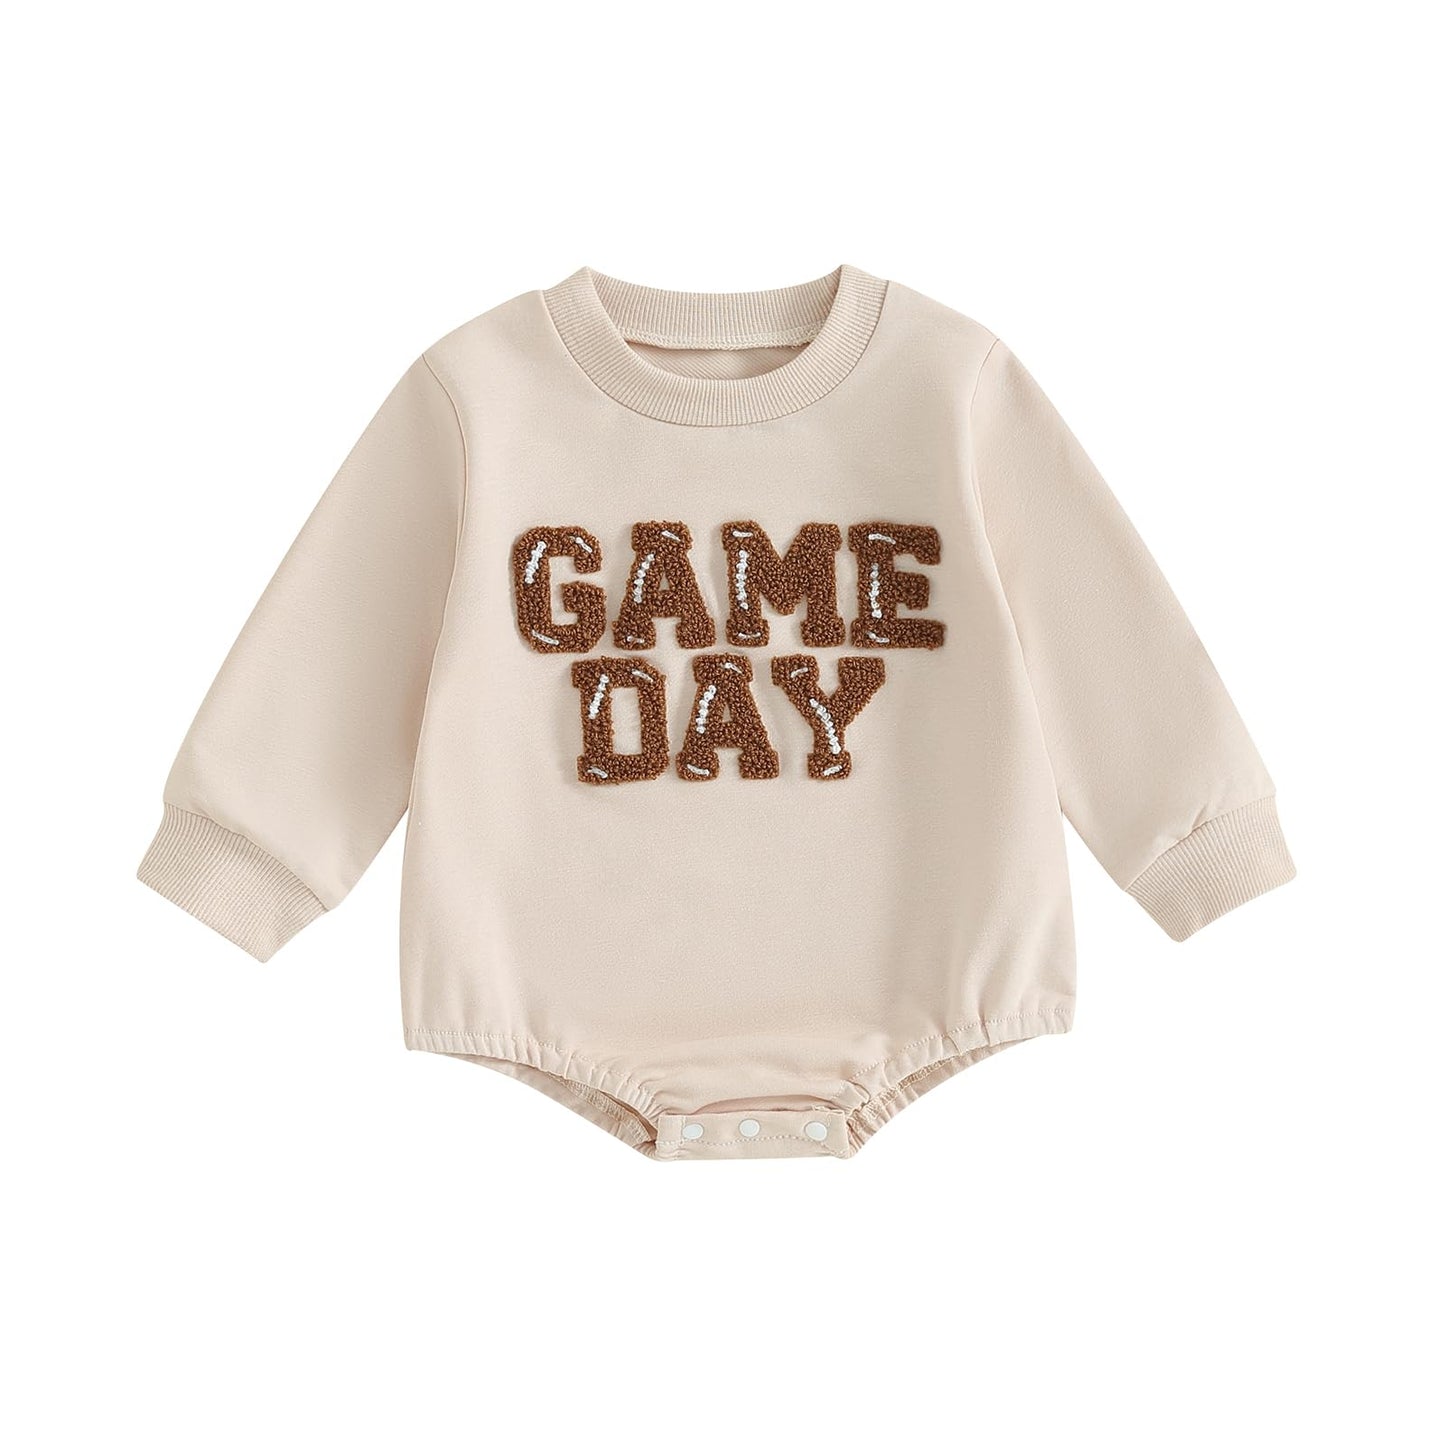 DNOMAID YZARC Infant Baby Girl Boy Football Sweatshirt Romper Funny Game Day Long Sleeve One Piece Bodysuit Top Fall Clothes